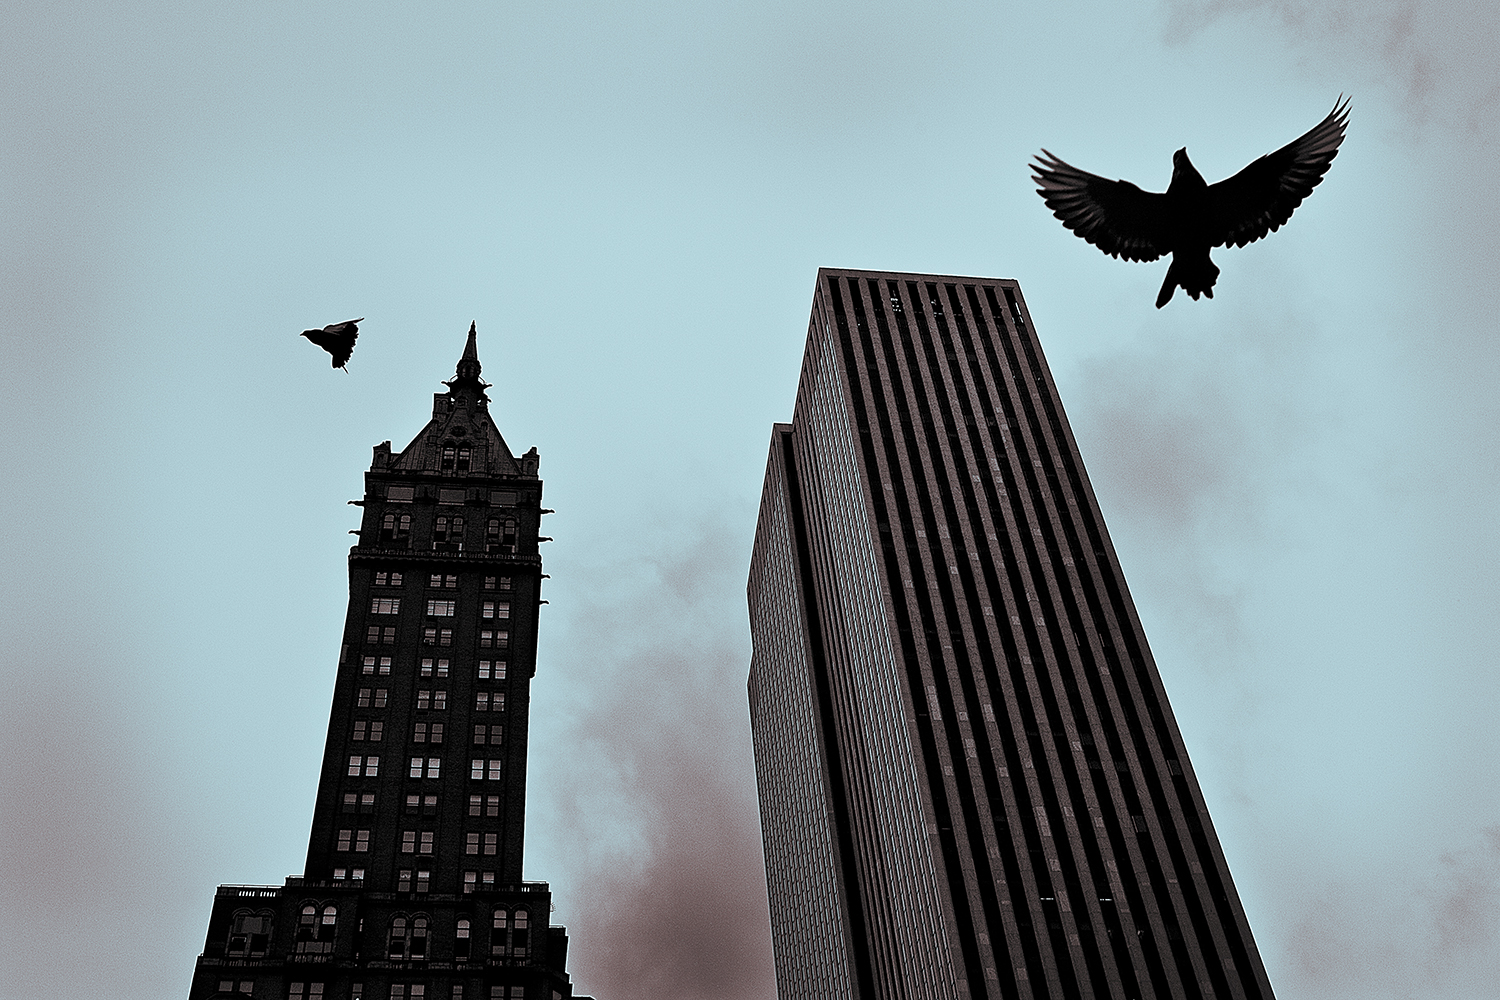 Pigeons in a New York Sky